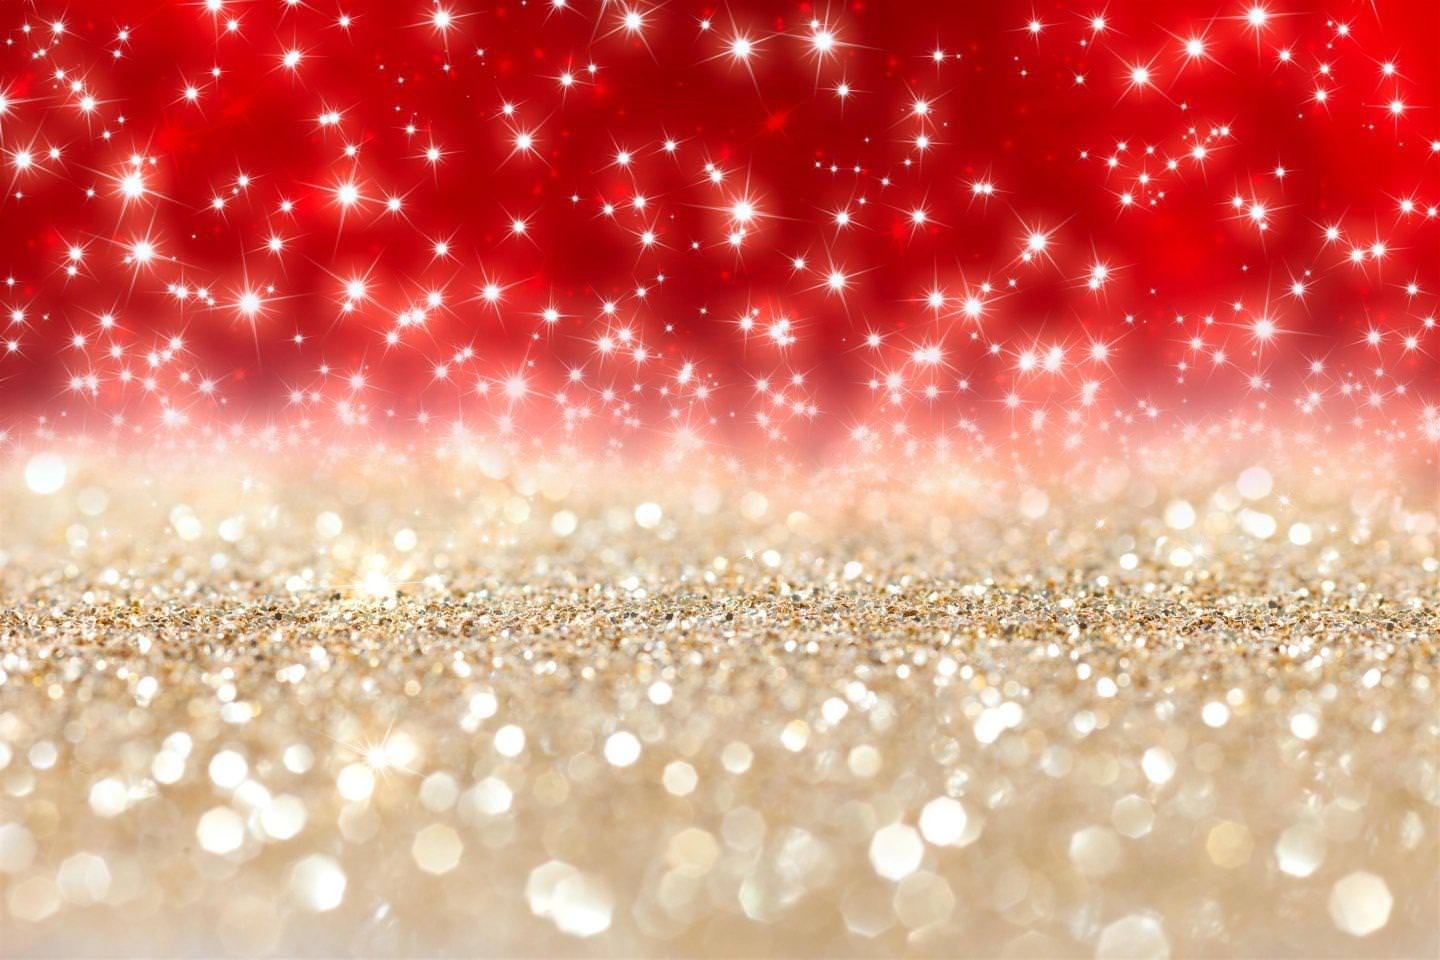 Red And White Glitter - HD Wallpaper 